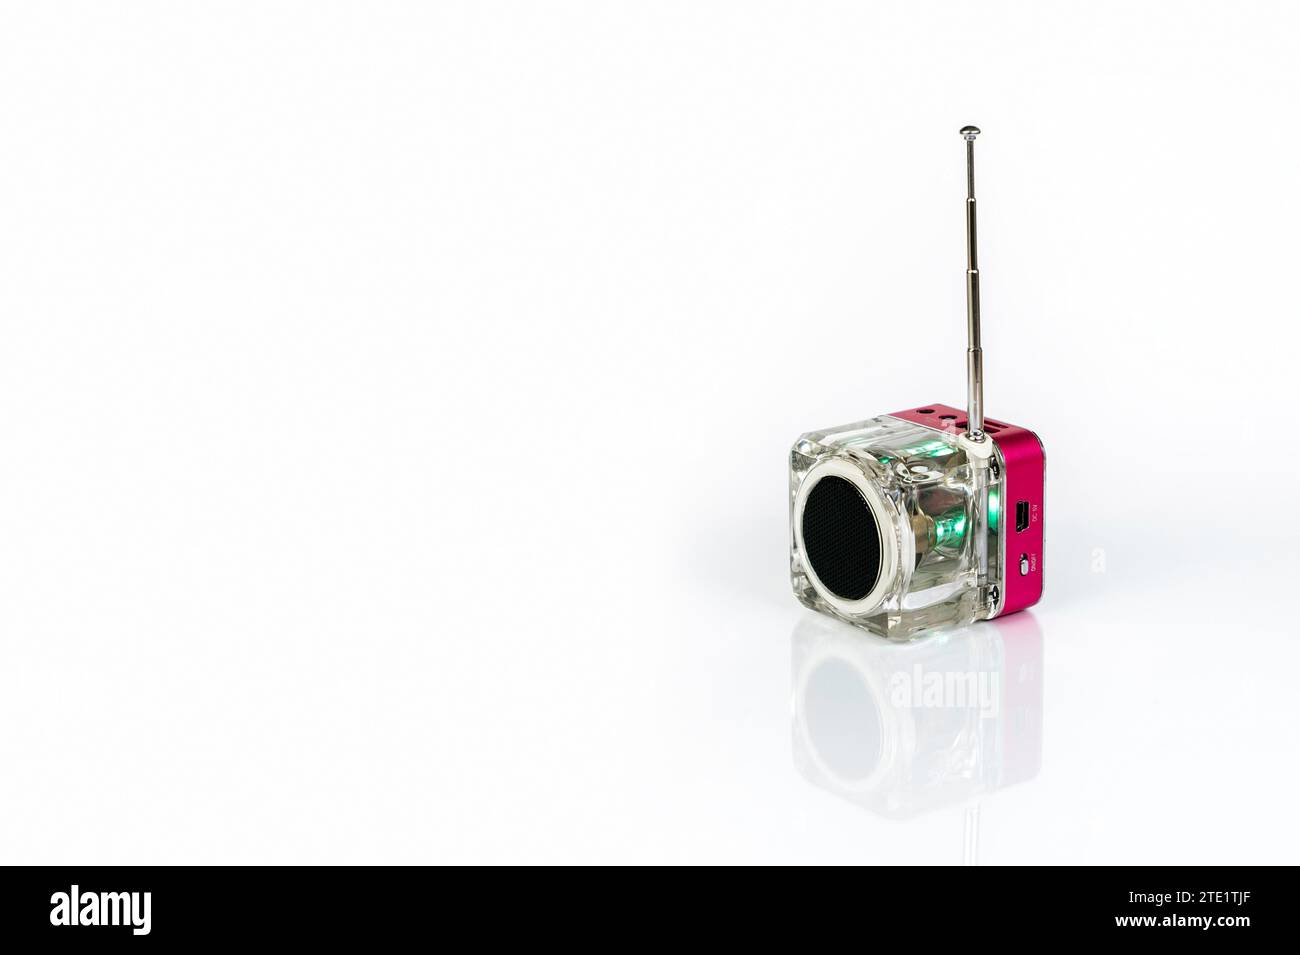 A small cube-shaped radio receiver on a white background with reflection Stock Photo